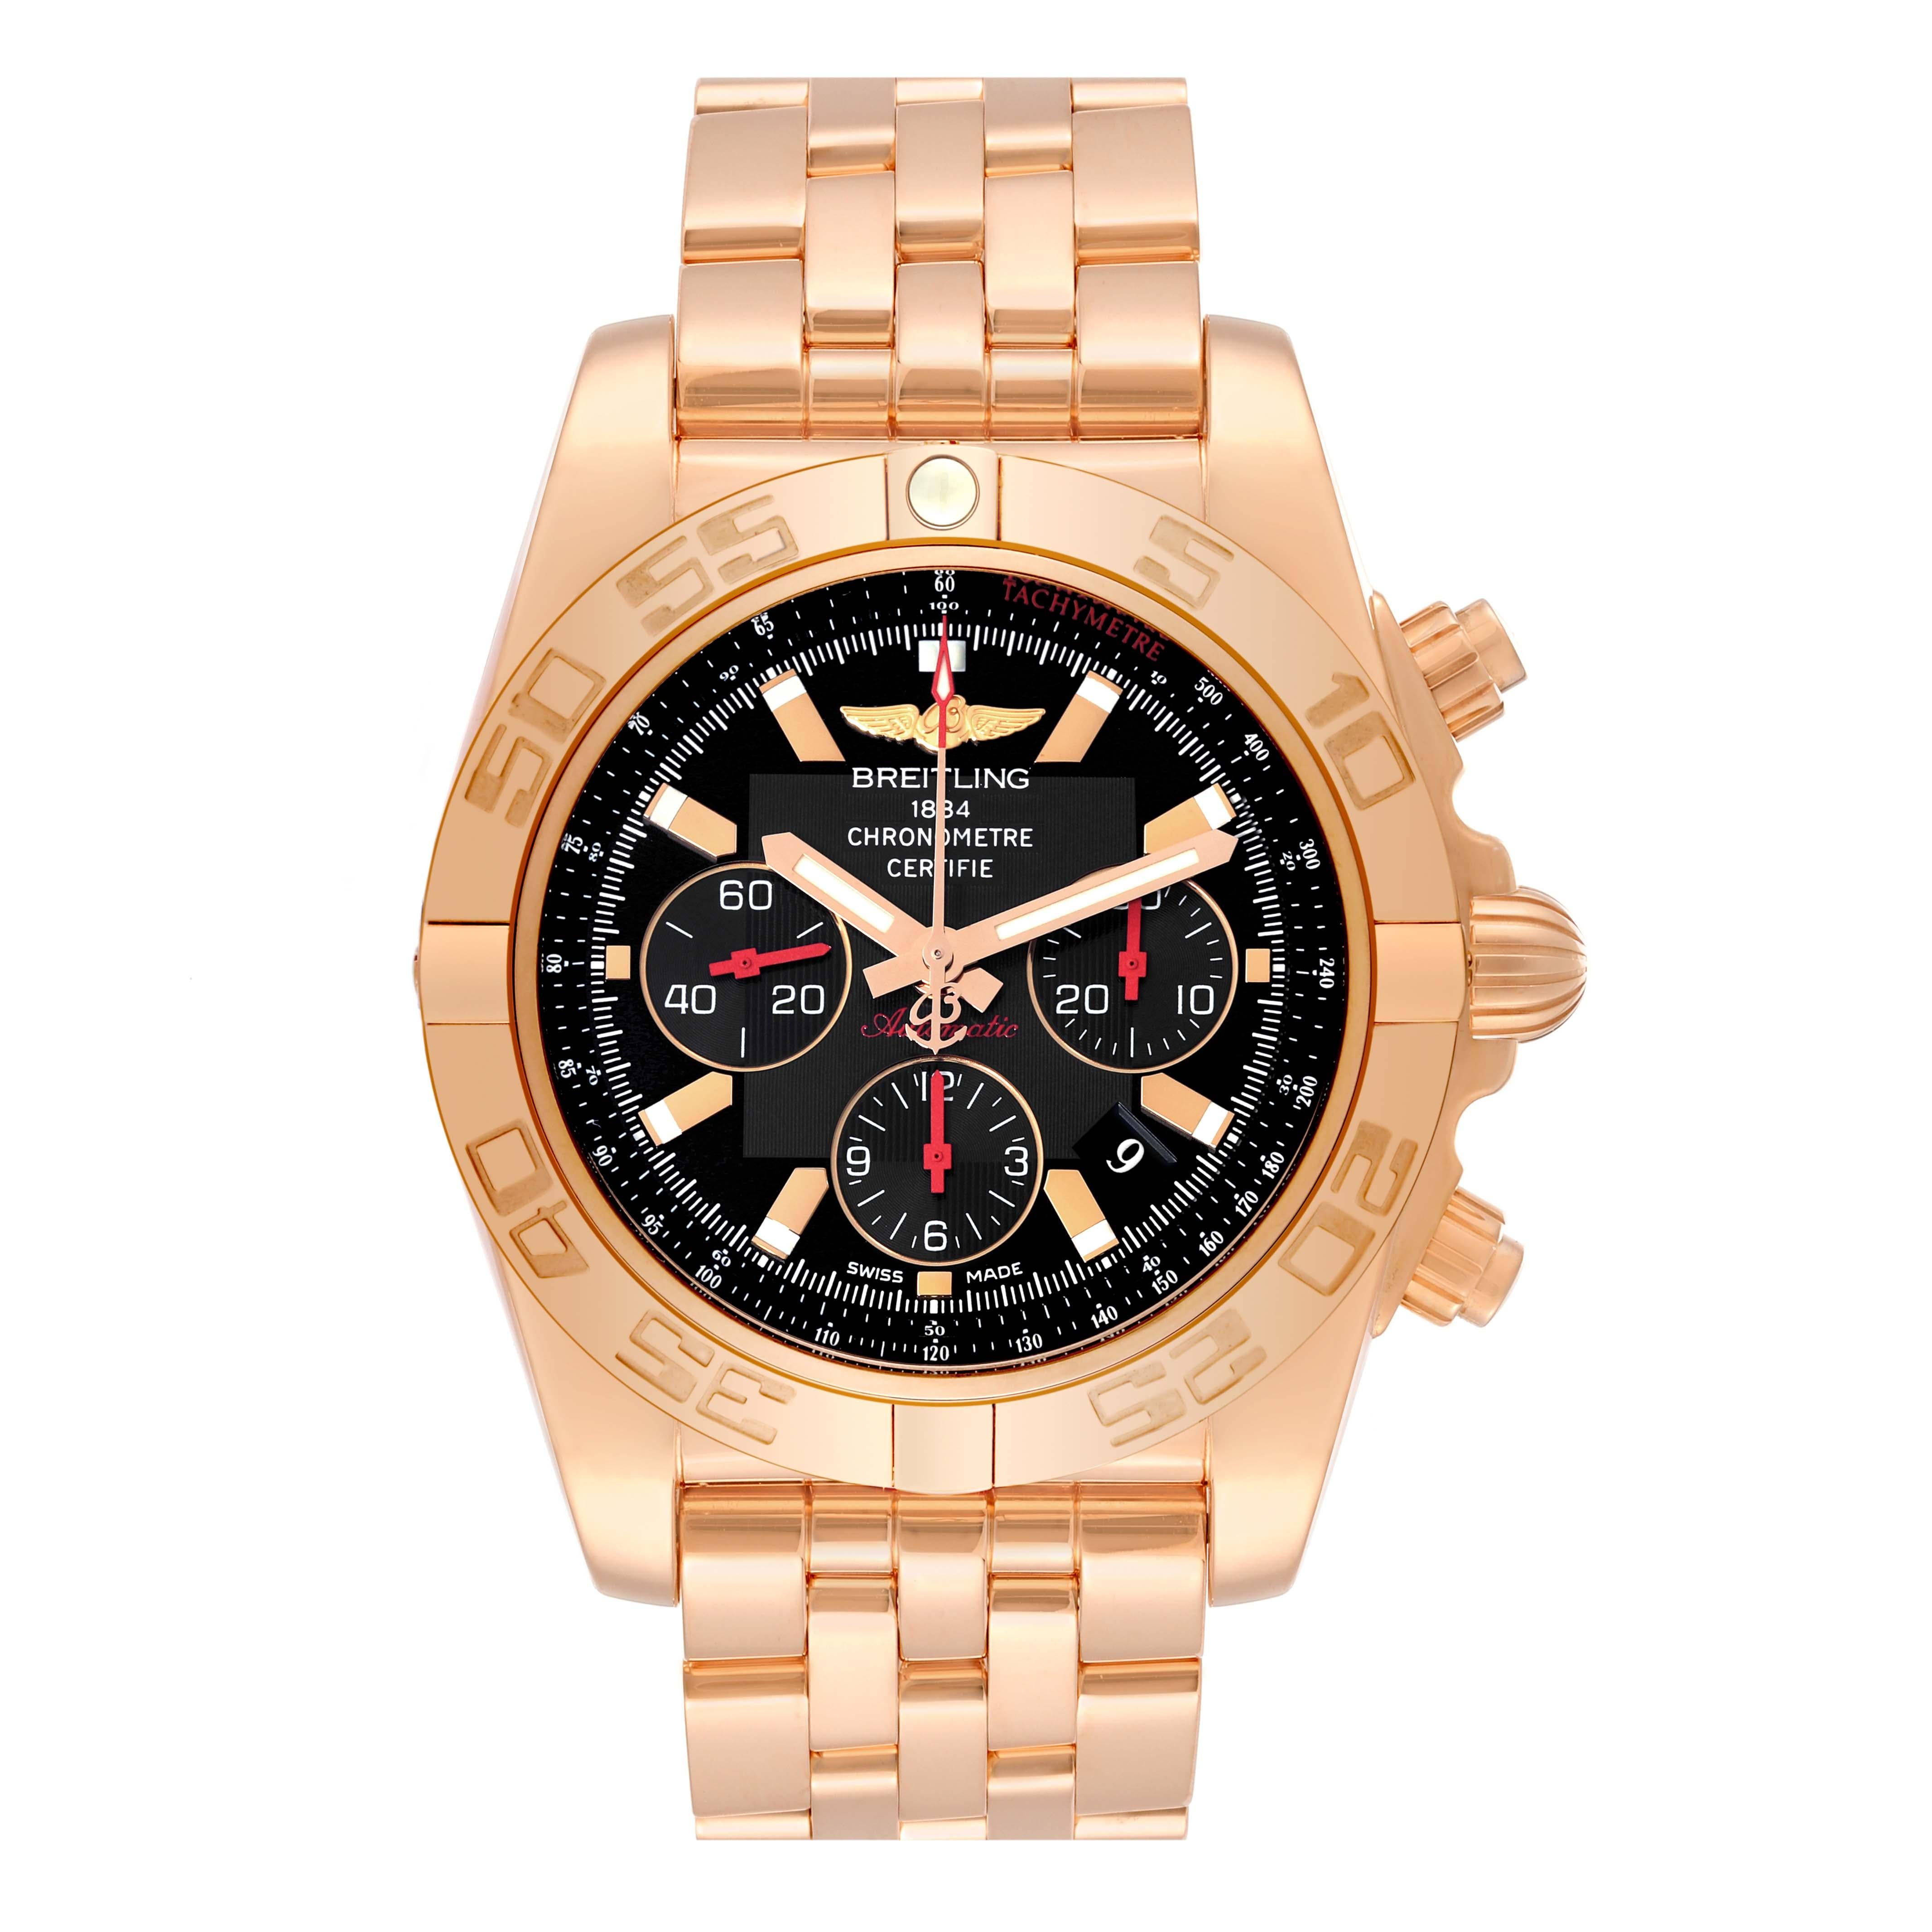 Breitling Chronomat 01 Limited Edition Rose Gold Mens Watch HB0111 Box Papers. Self-winding automatic officially certified chronometer movement. Chronograph function. 18k rose gold case 43.5 mm in diameter with screwed down crown and pushers. 18k